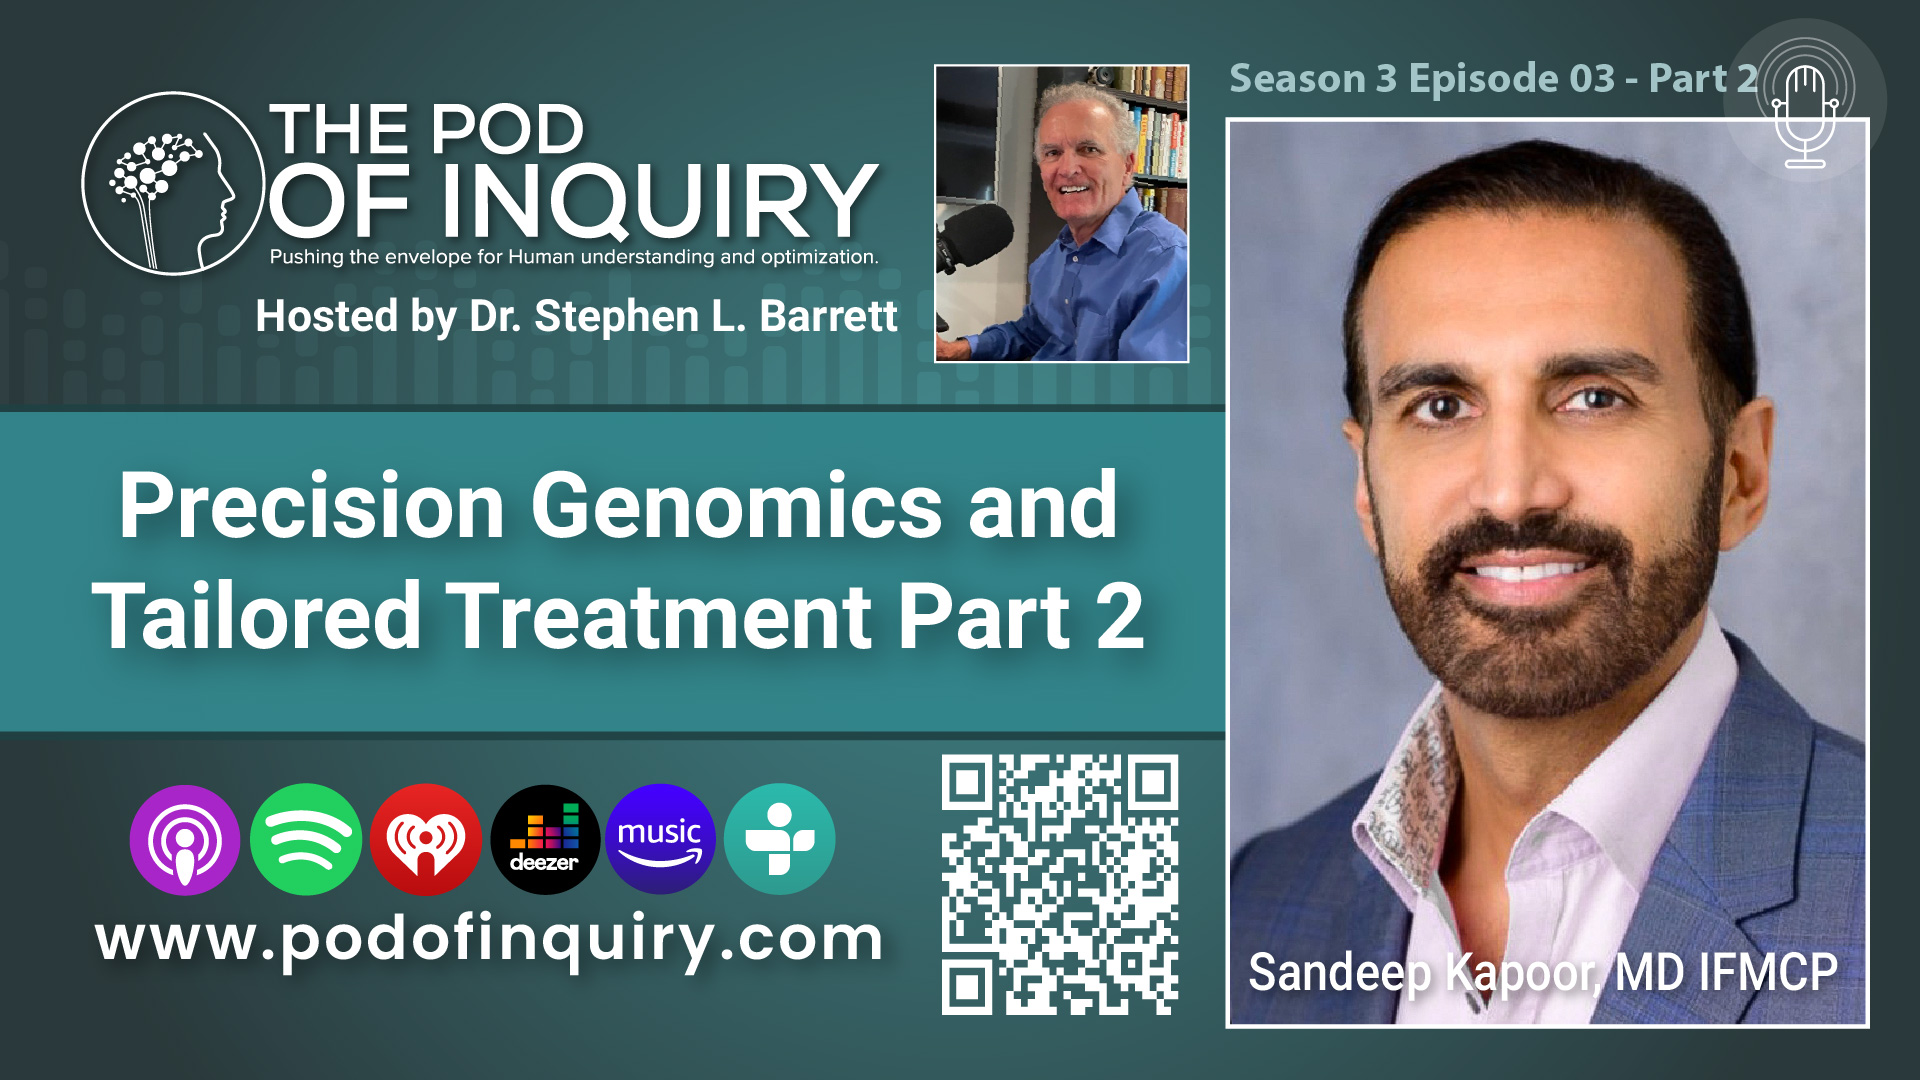 Precision Genomics and Tailored Treatment P2 w Sandeep Kapoor, MD IFMCP